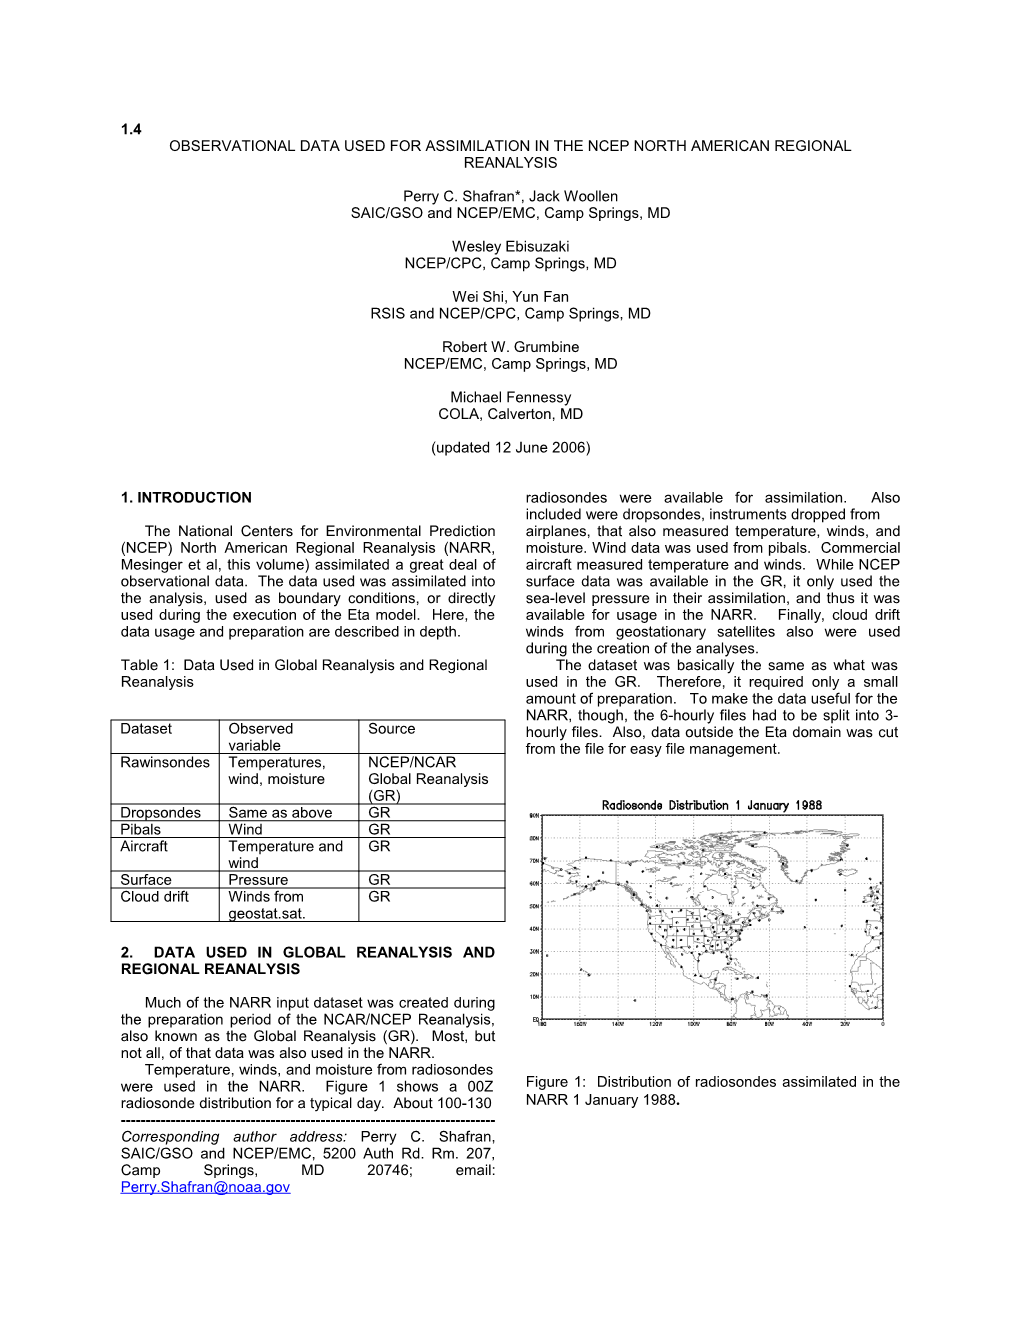 Observational Data Used for Assimilation in the NCEP North Amer